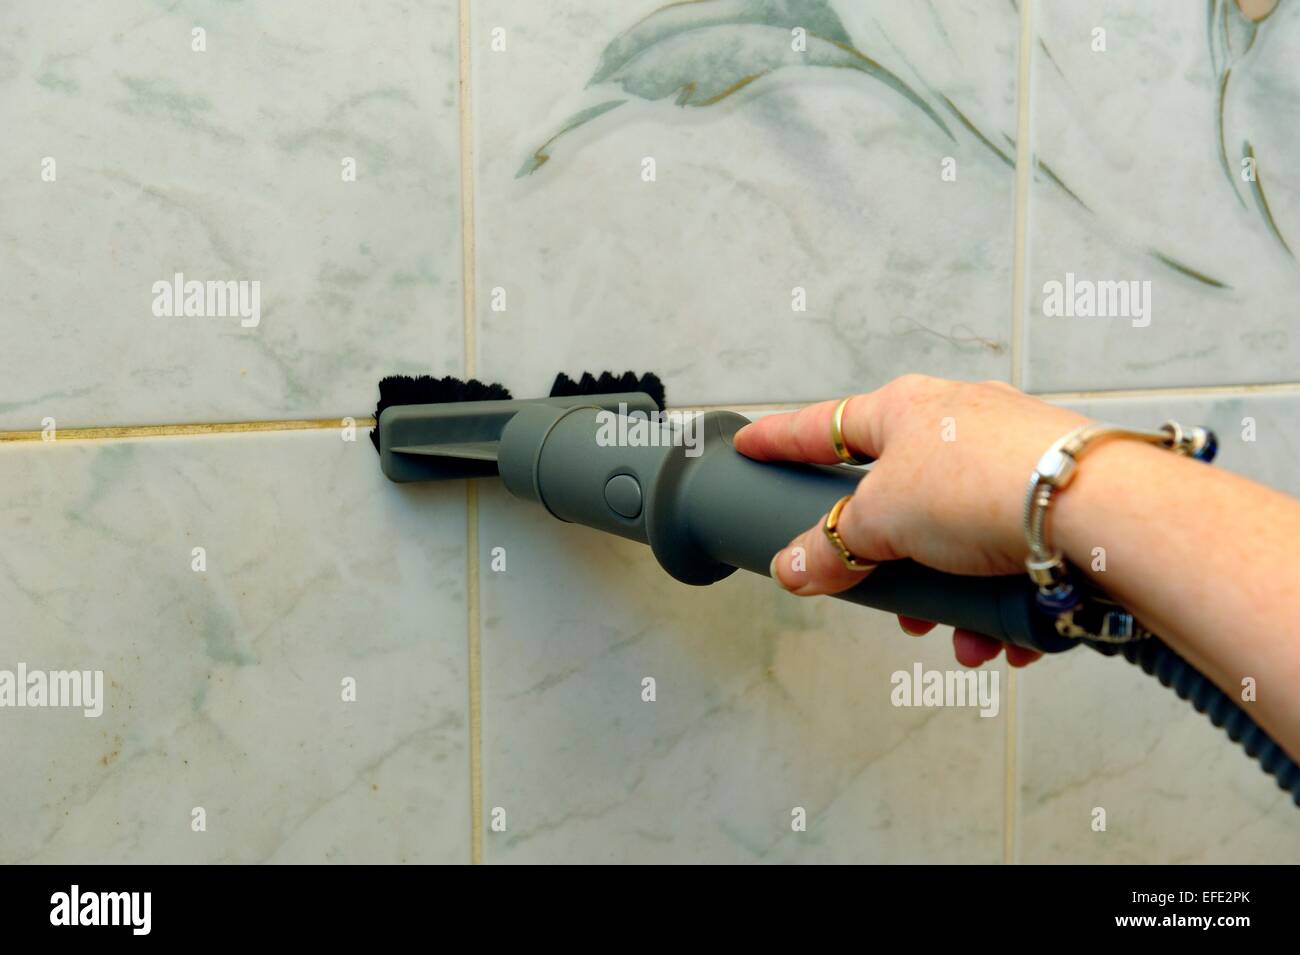 A woman using a steam cleaner on bathroom tiles Stock Photo